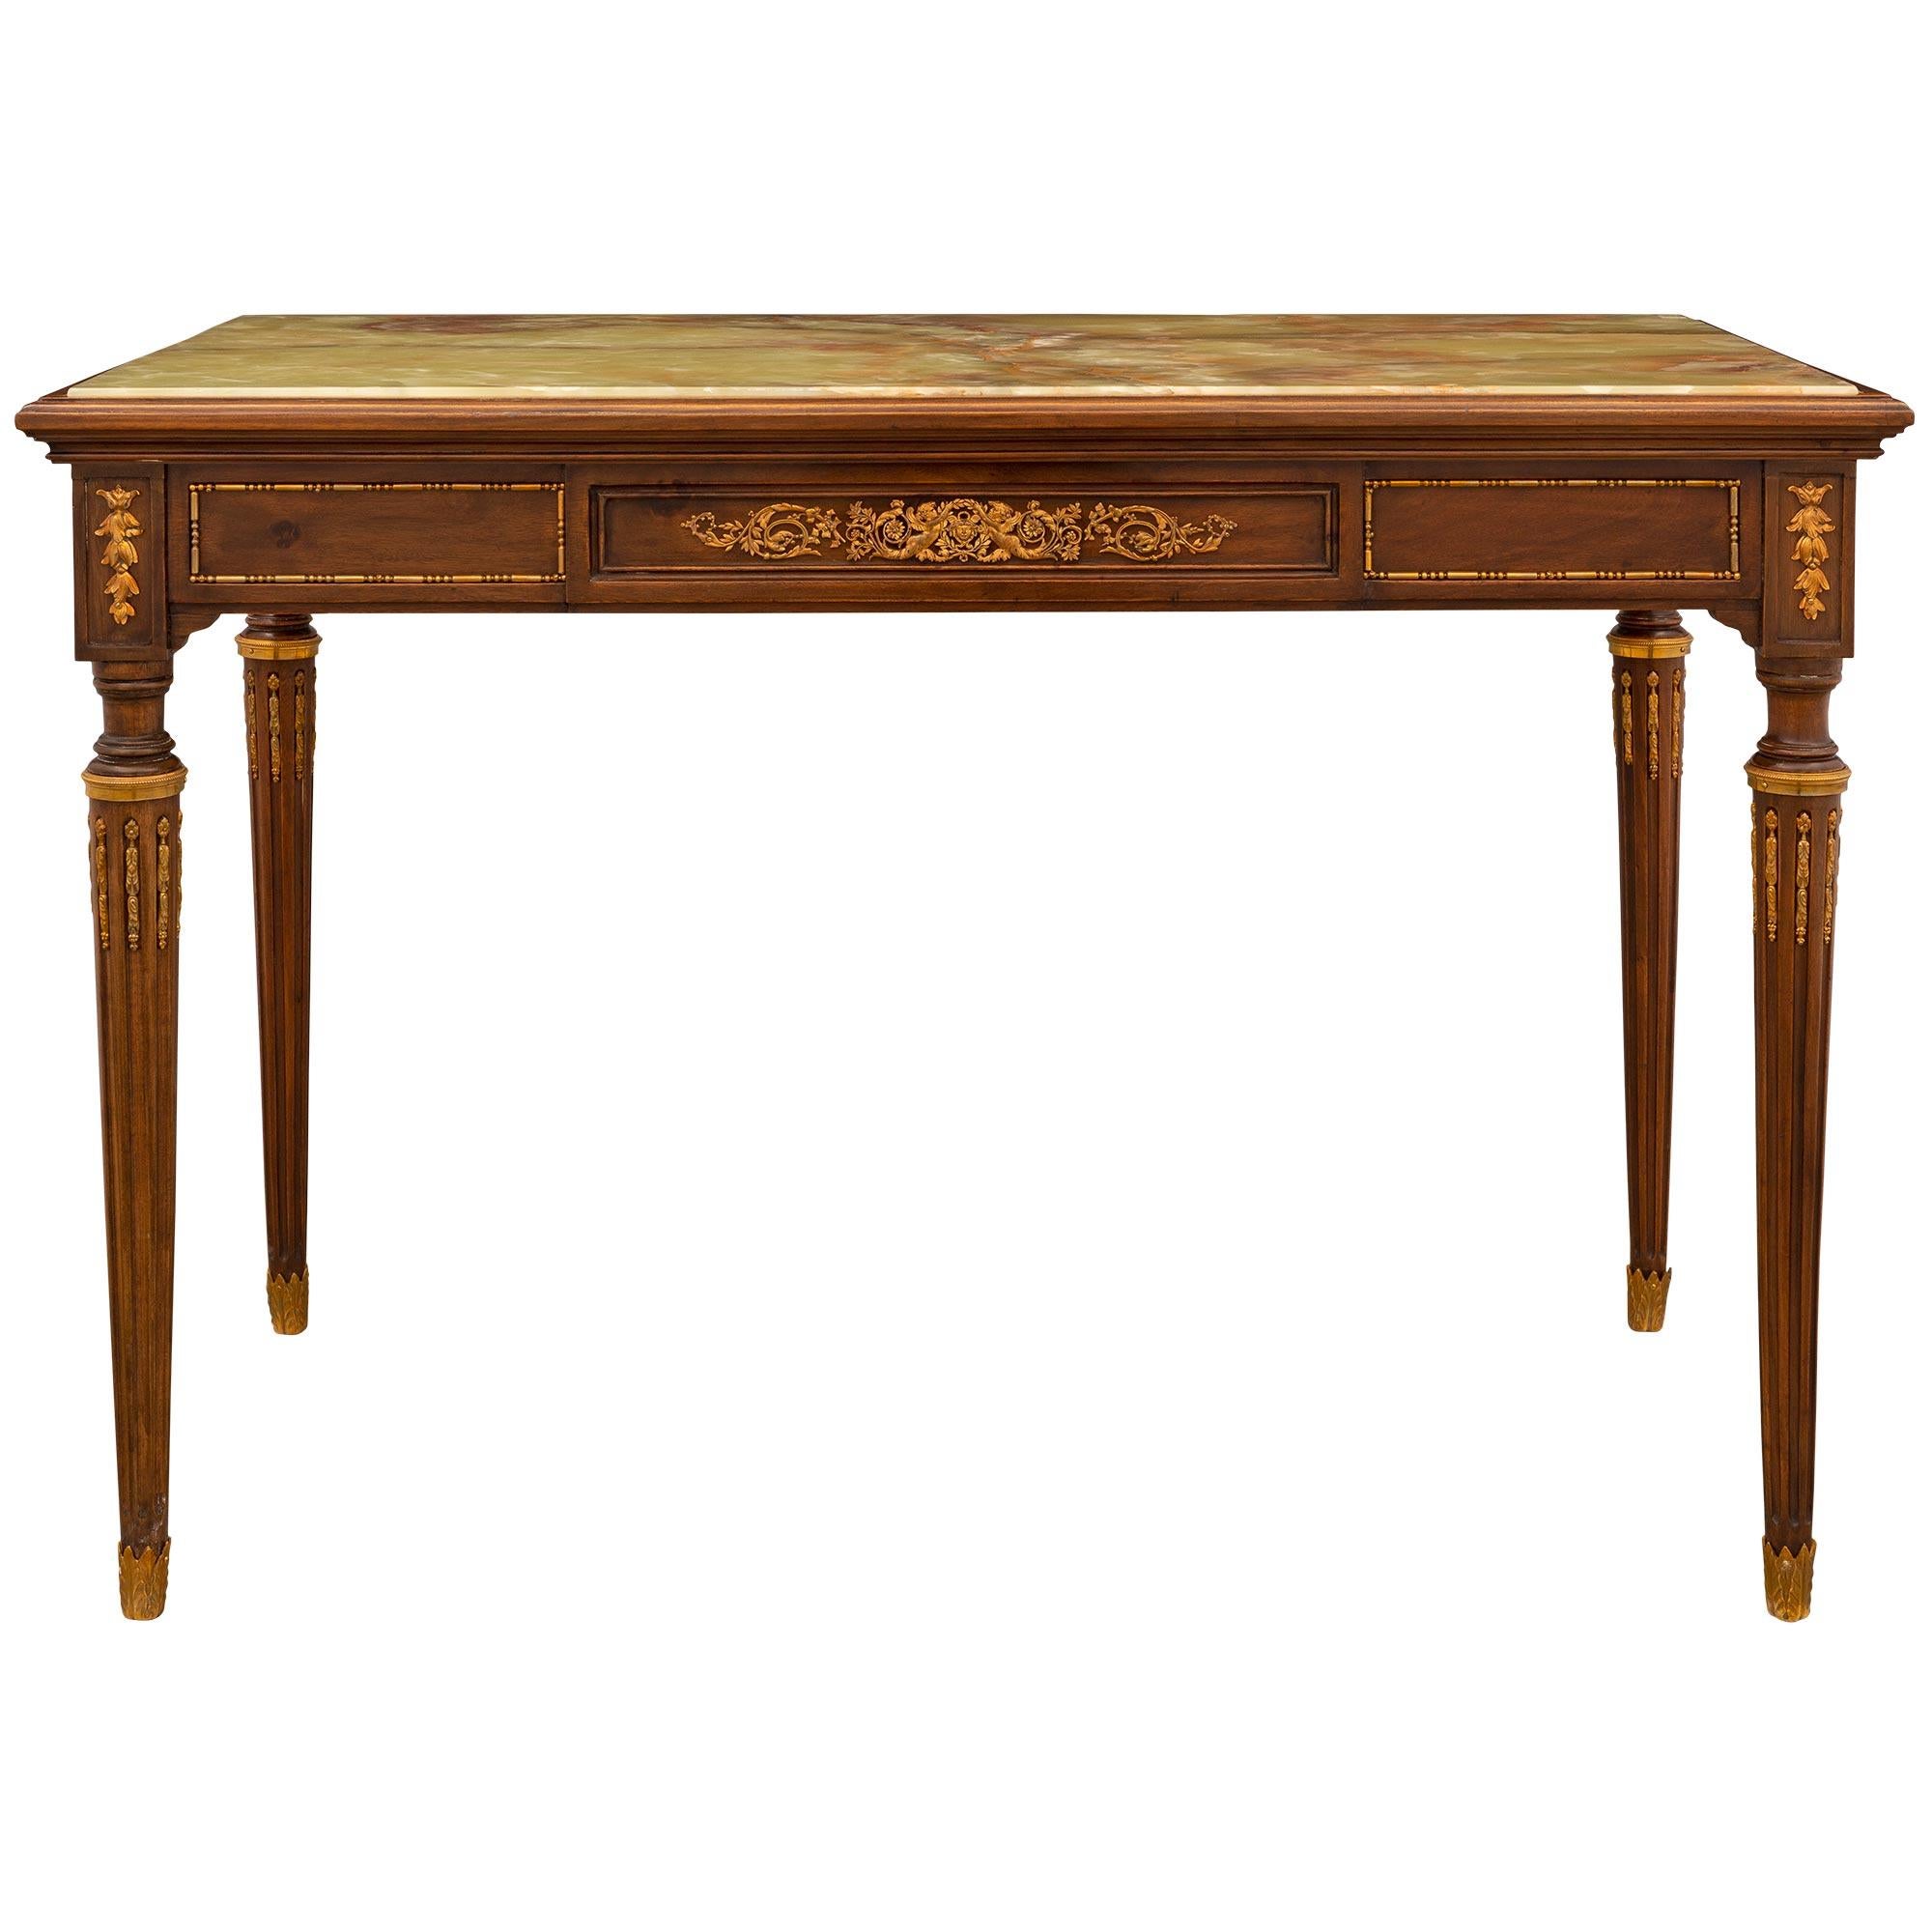 French 19th Century Louis XVI Style Mahogany, Onyx and Ormolu Table For Sale